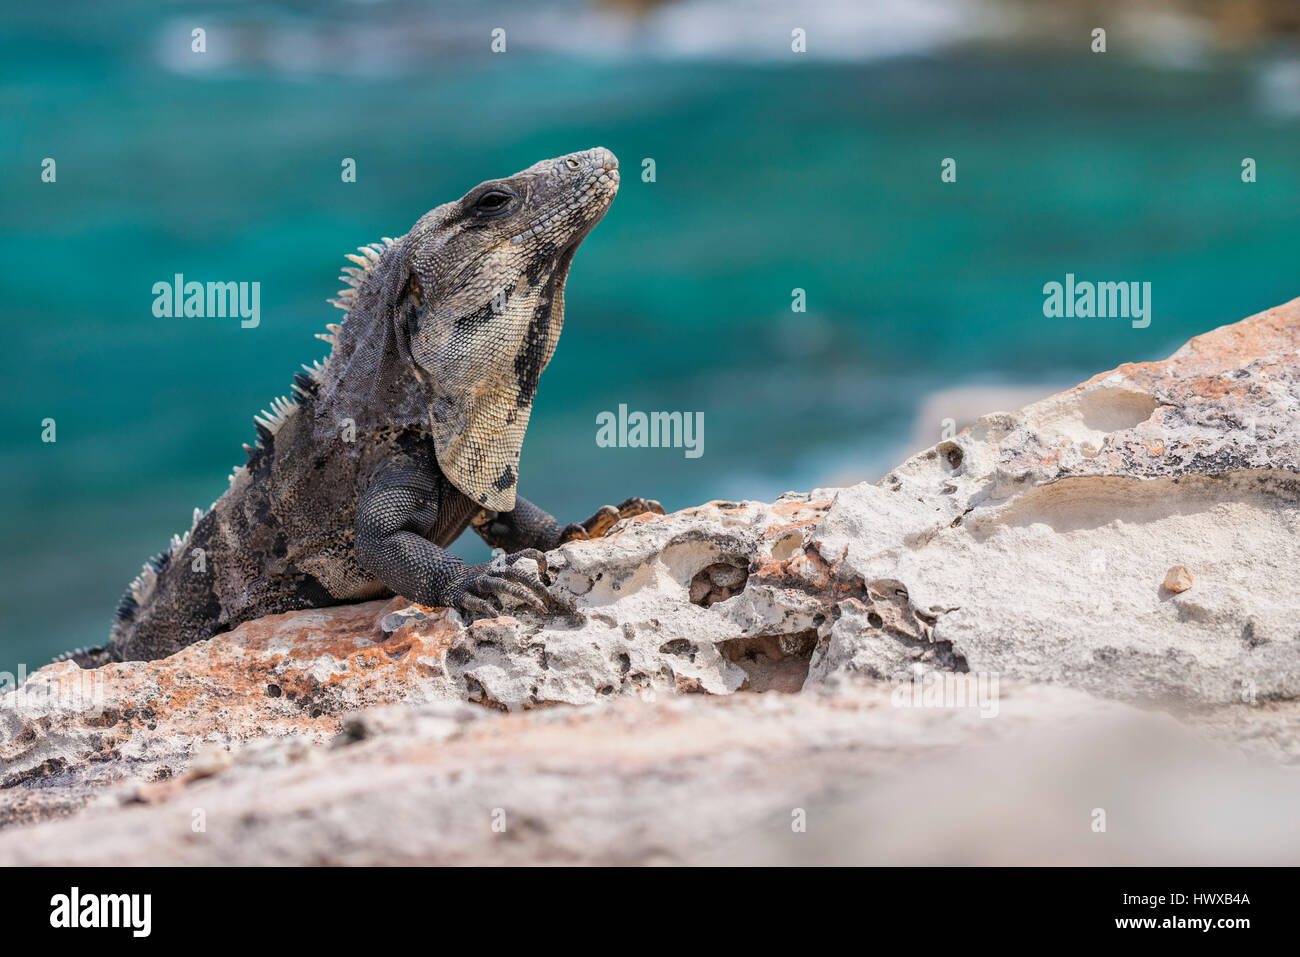 close up of Iguana lizard worming up on the rock in Mexico Stock Photo